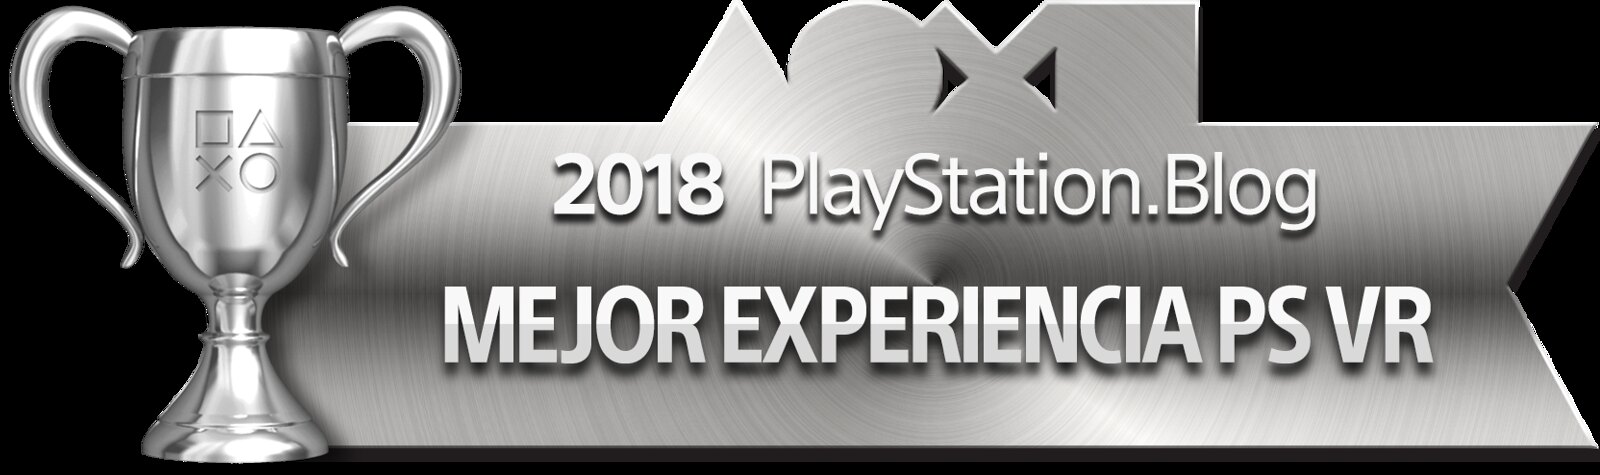 Best PS VR Experience - Silver